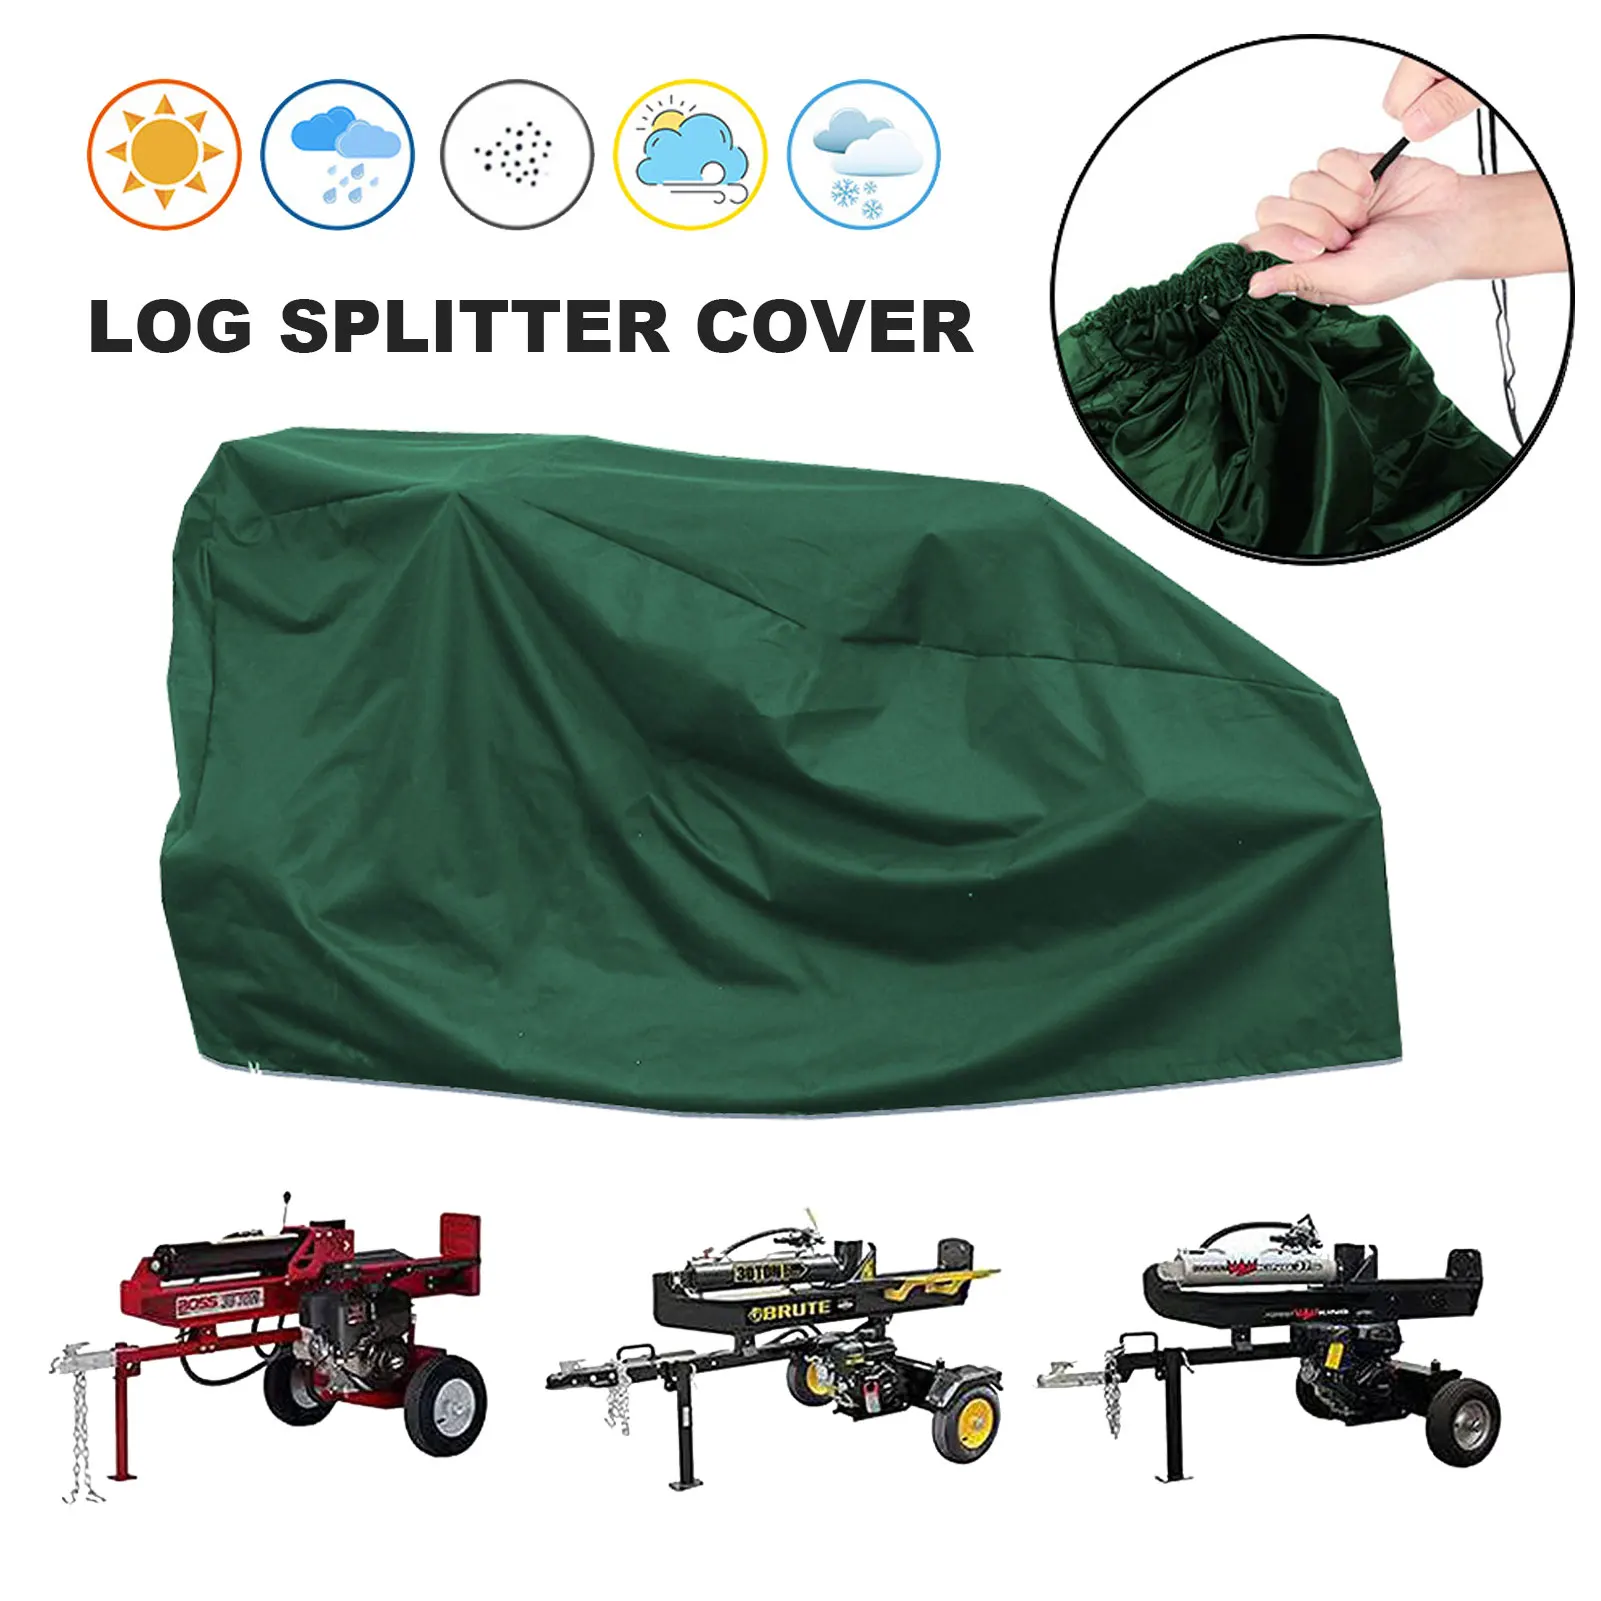 

Wood Splitter Cover Waterproof Heavy-Duty Log Splitter Cover 210D Oxford Weather-Resistant Storage Cover Anti Dust Protec Cover